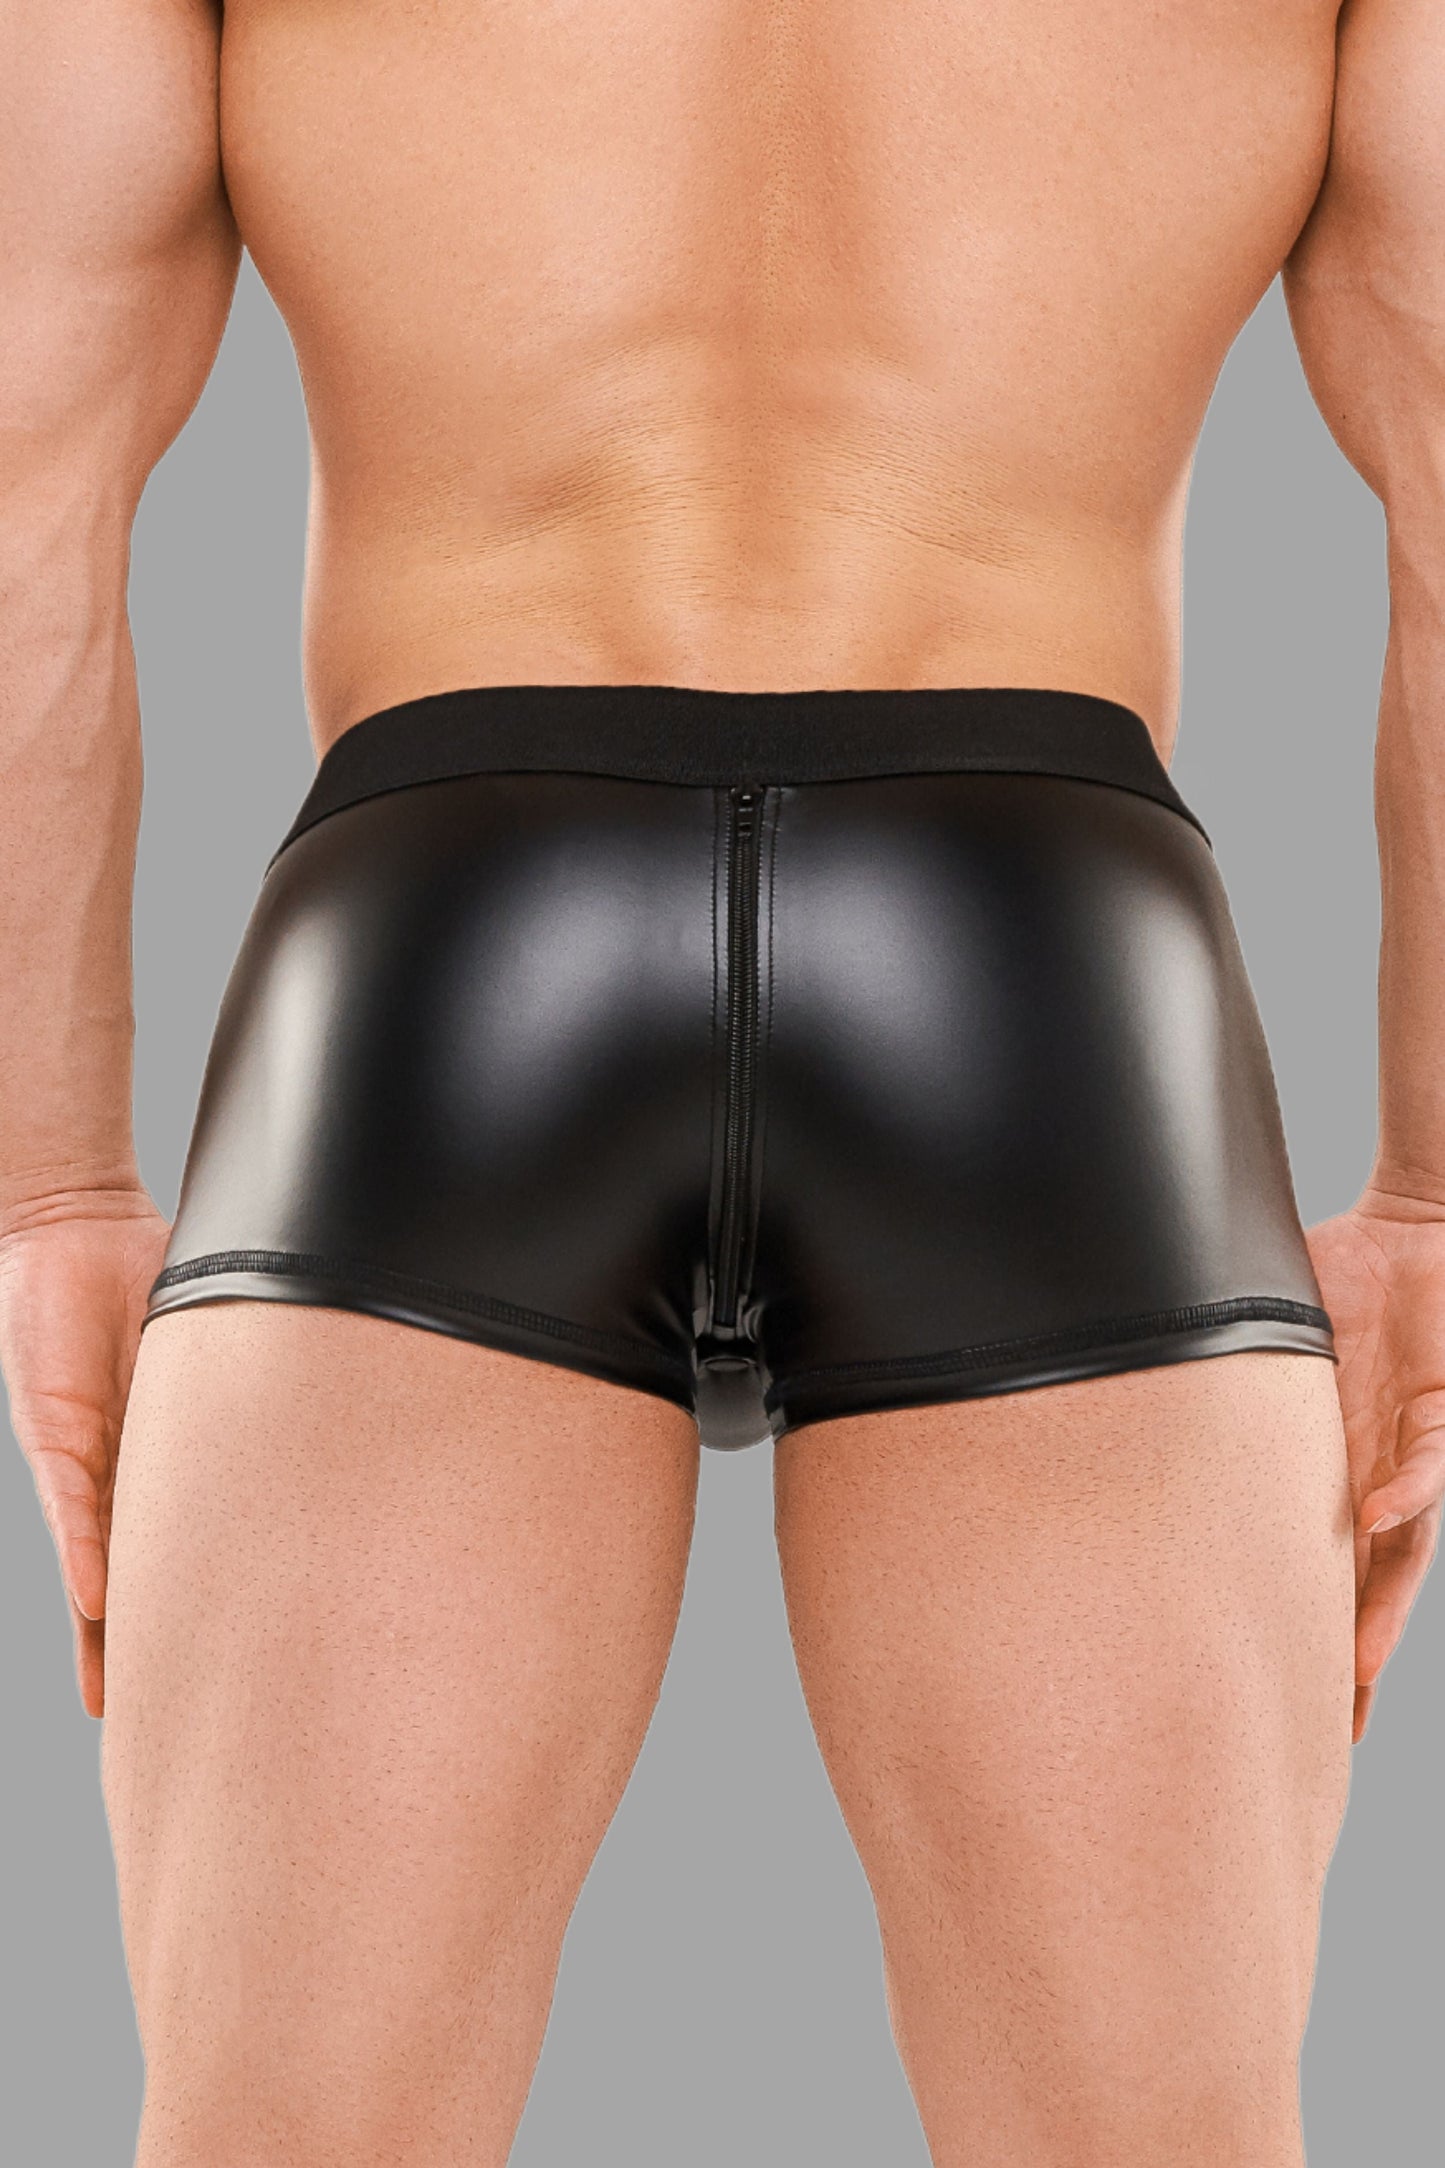 Armored Next. Men's Trunk Shorts. Black+Red